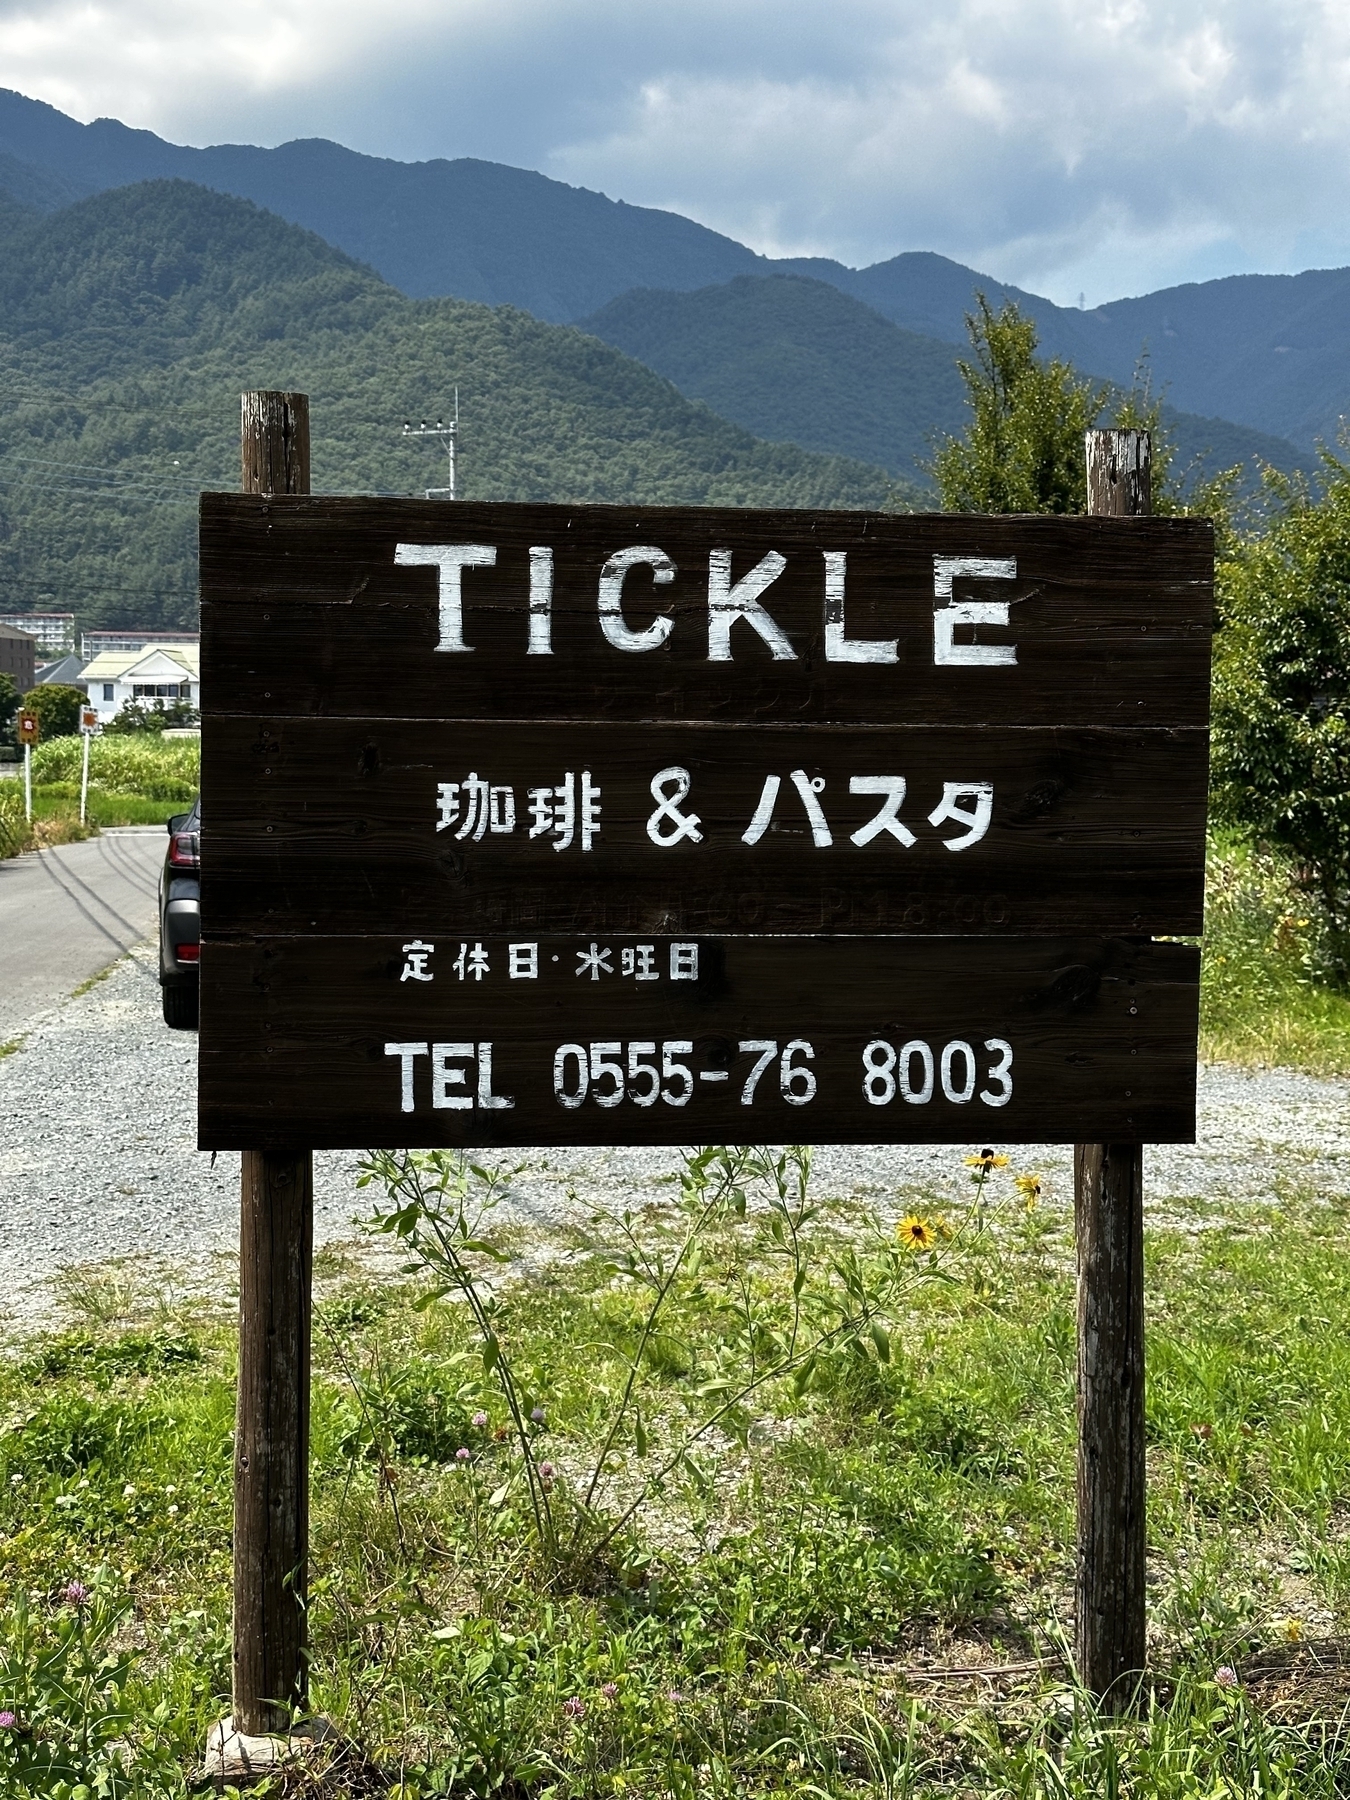 Sign in Japanese. Tickle sign I haven’t translated.